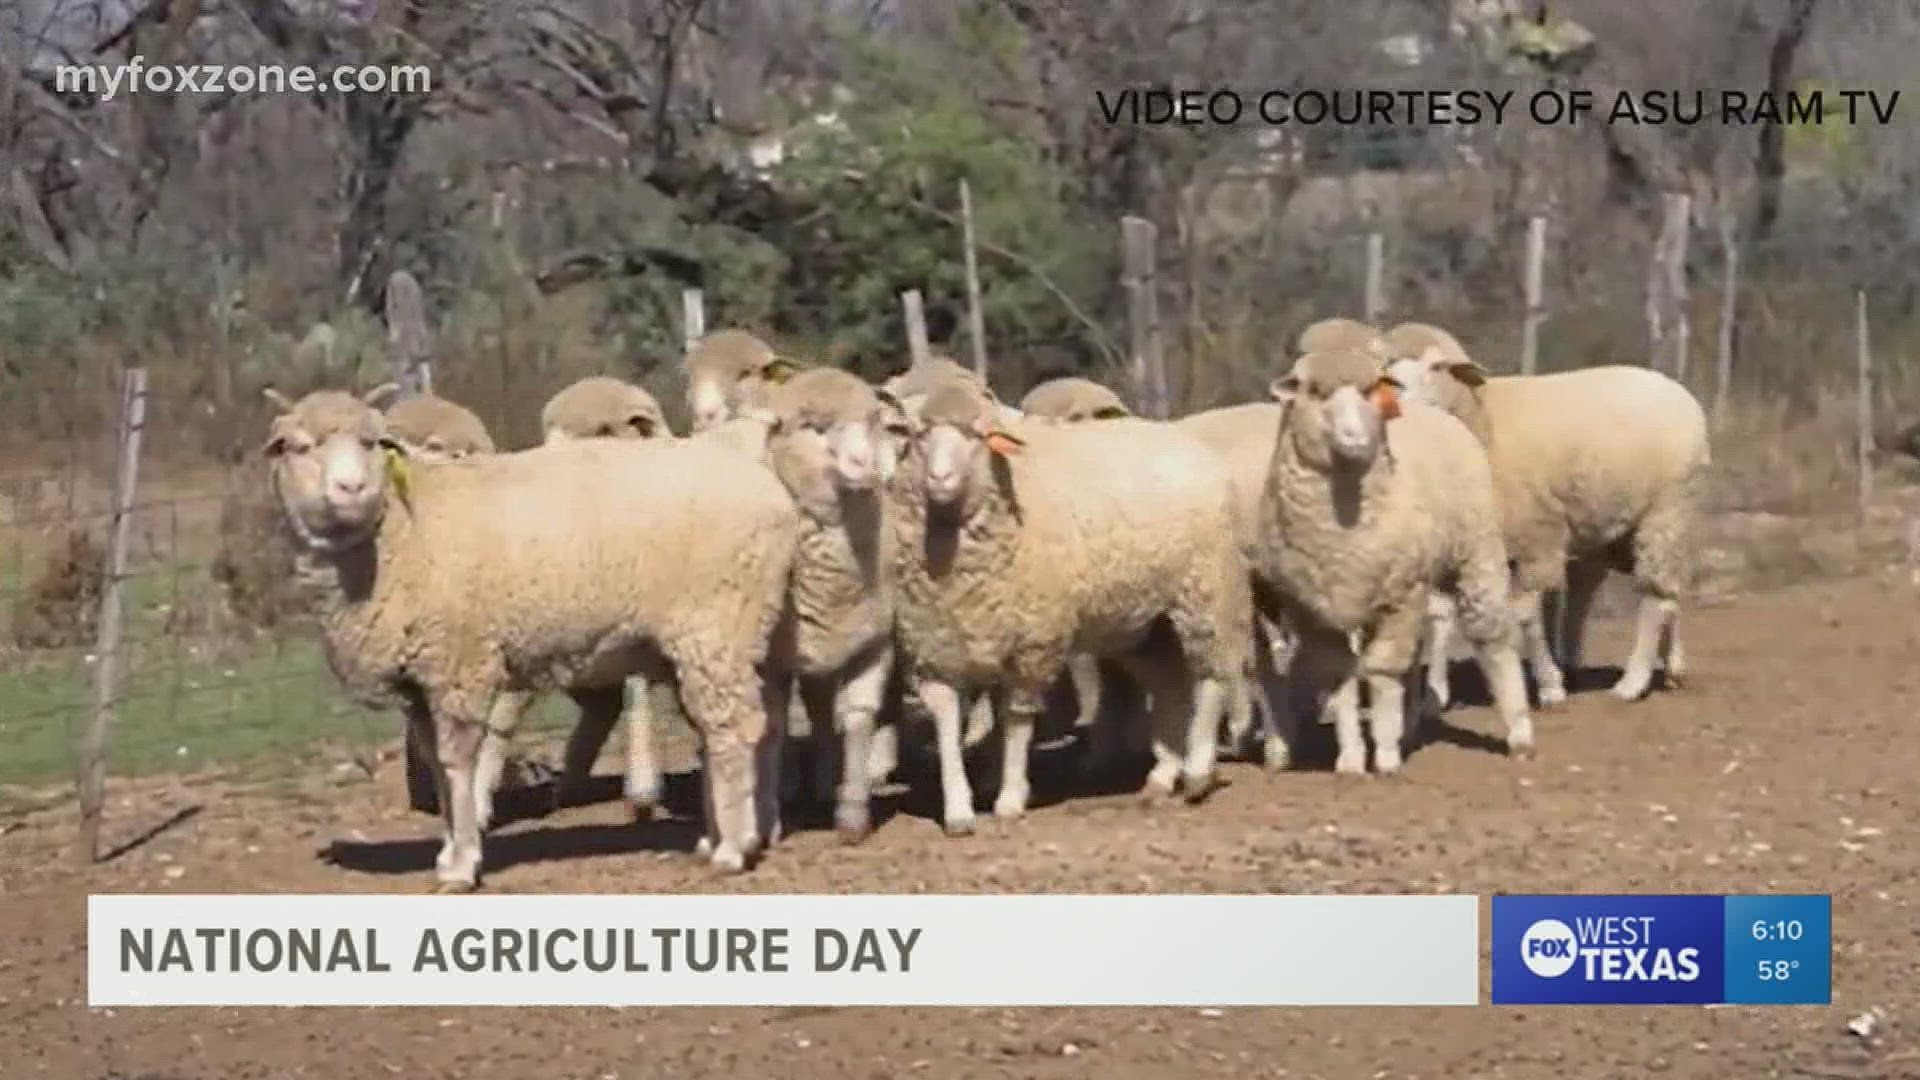 Tuesday is National Agriculture Day, dedicated to highlight the impact it has created nationwide.